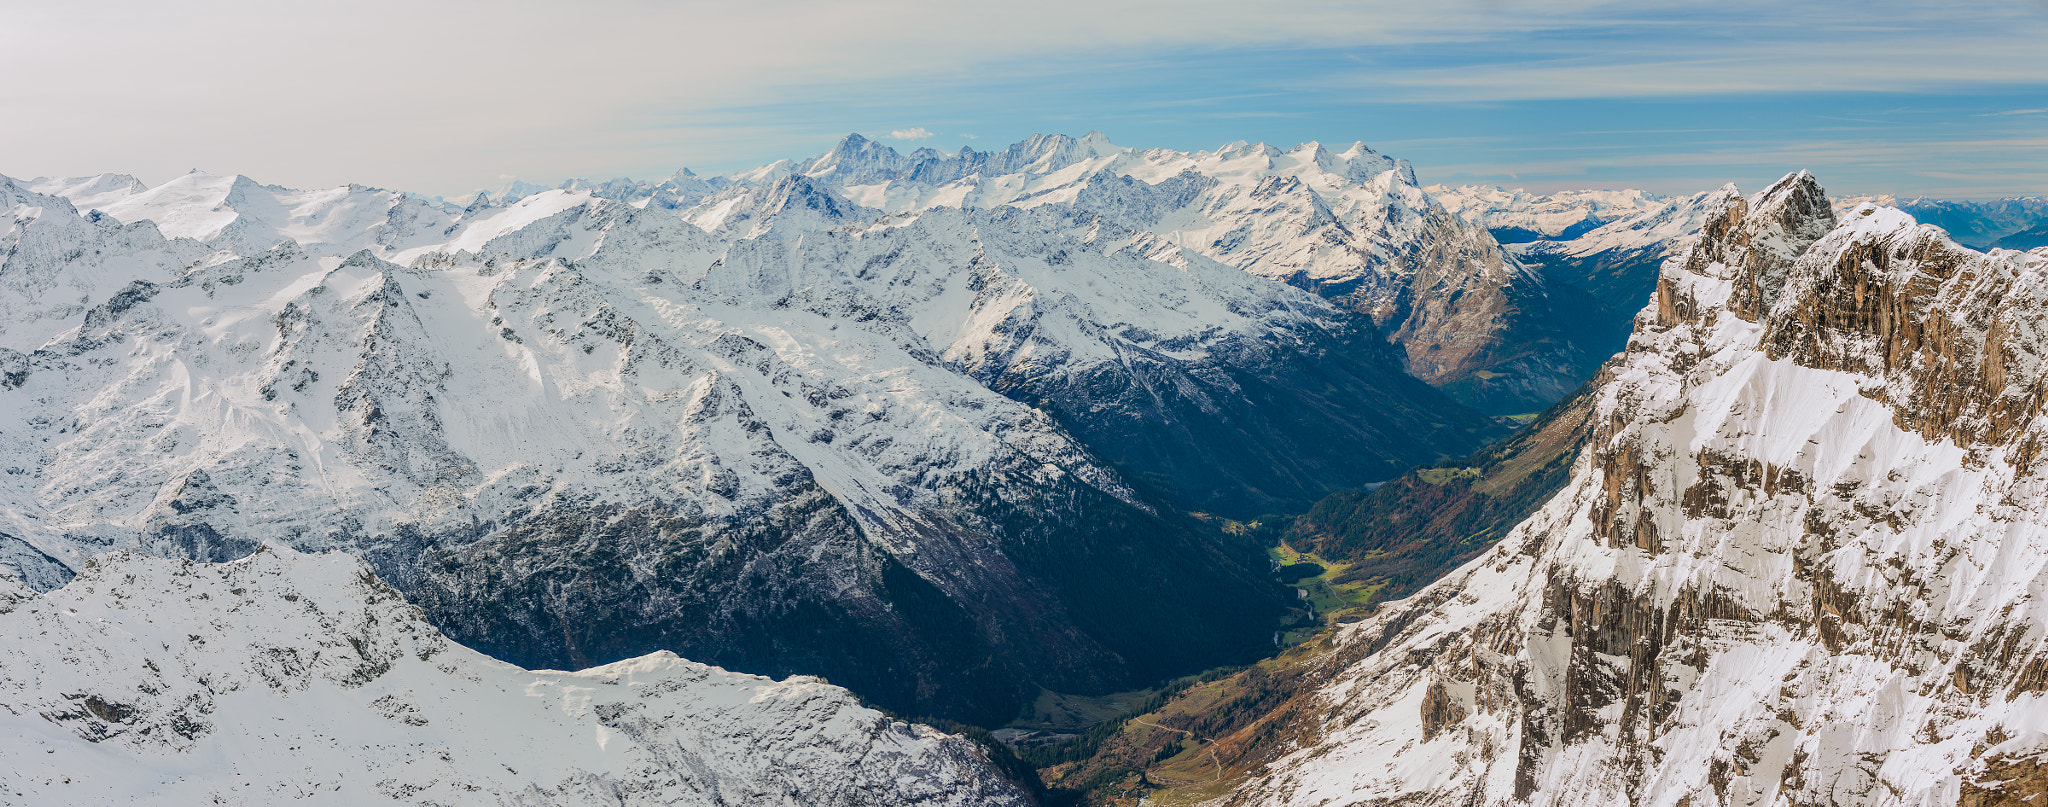 Nikon D3 sample photo. Scenery of snow covered mountains valley titlis, engelberg, switzerland photography